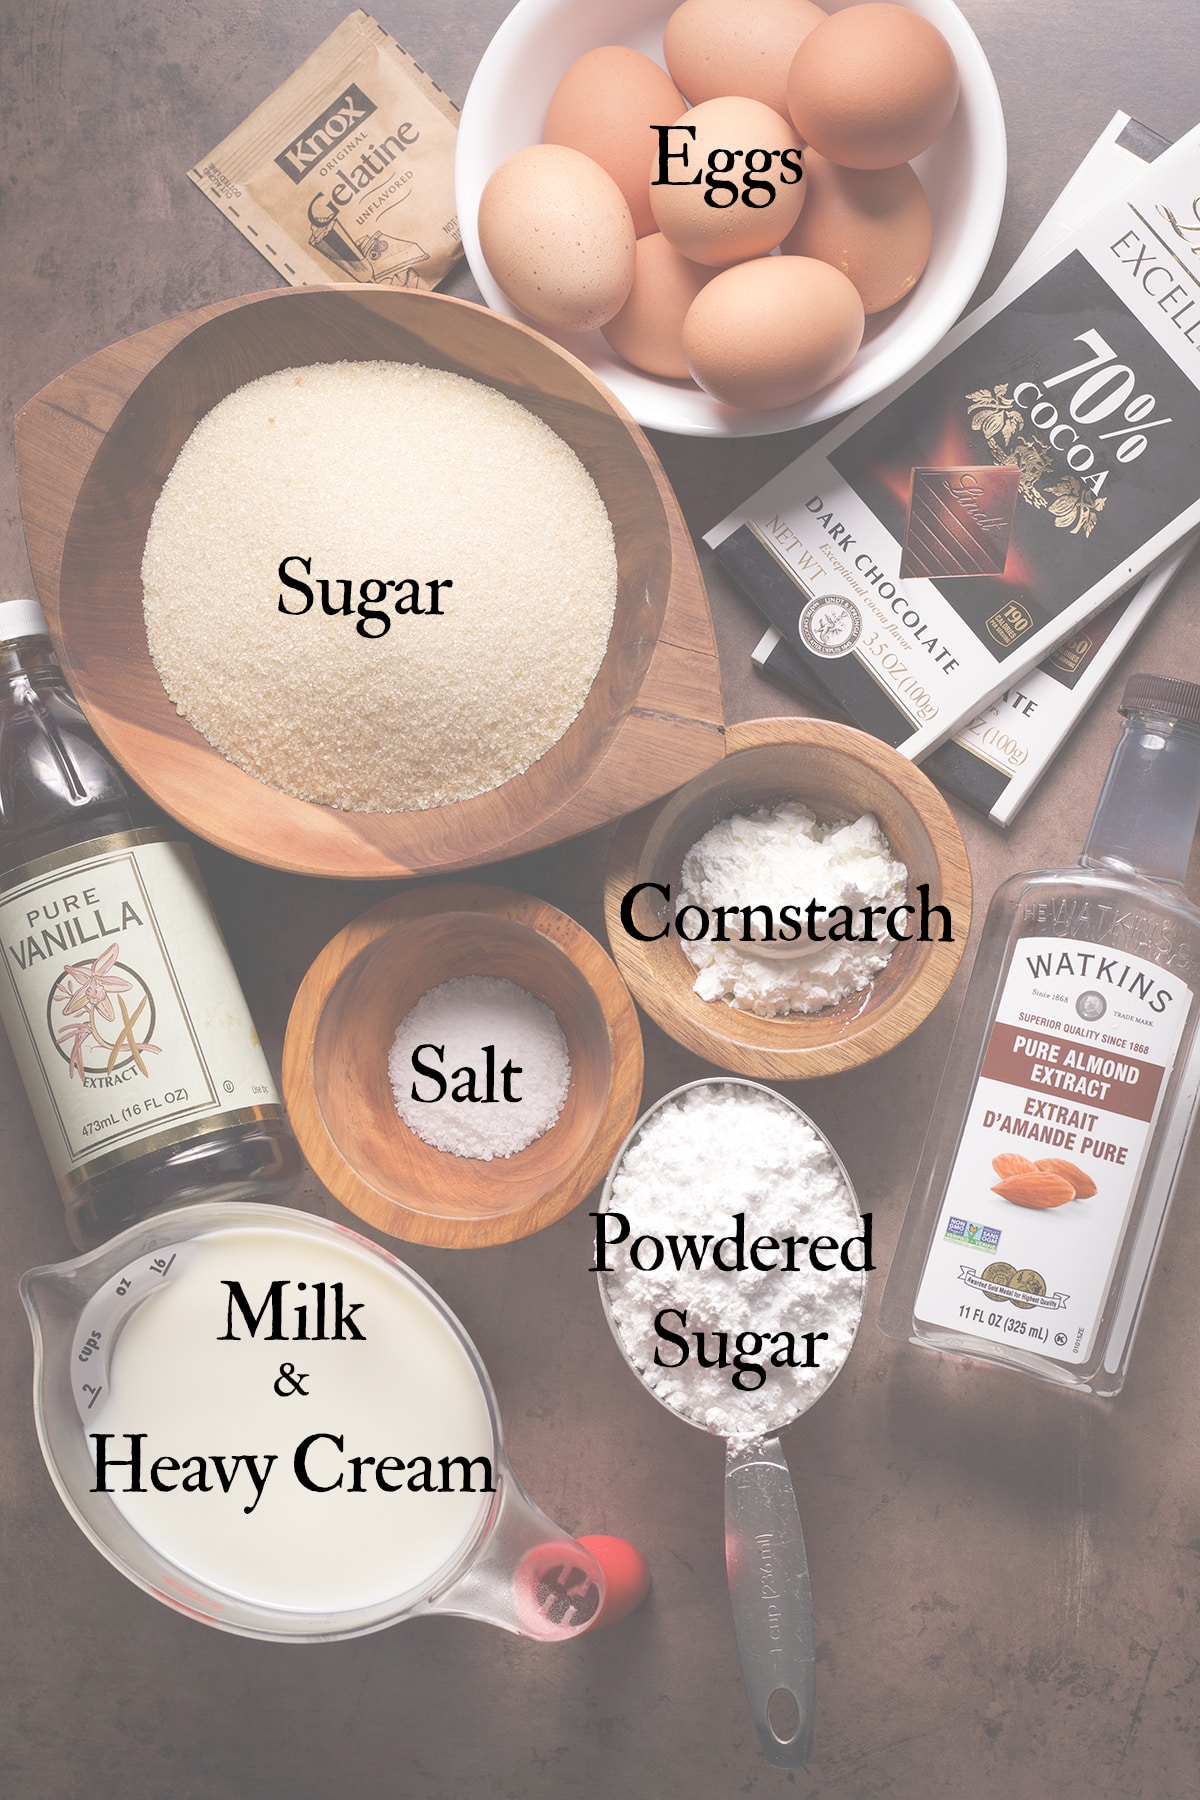 All of the ingredients required to make a chocolate cream pie.